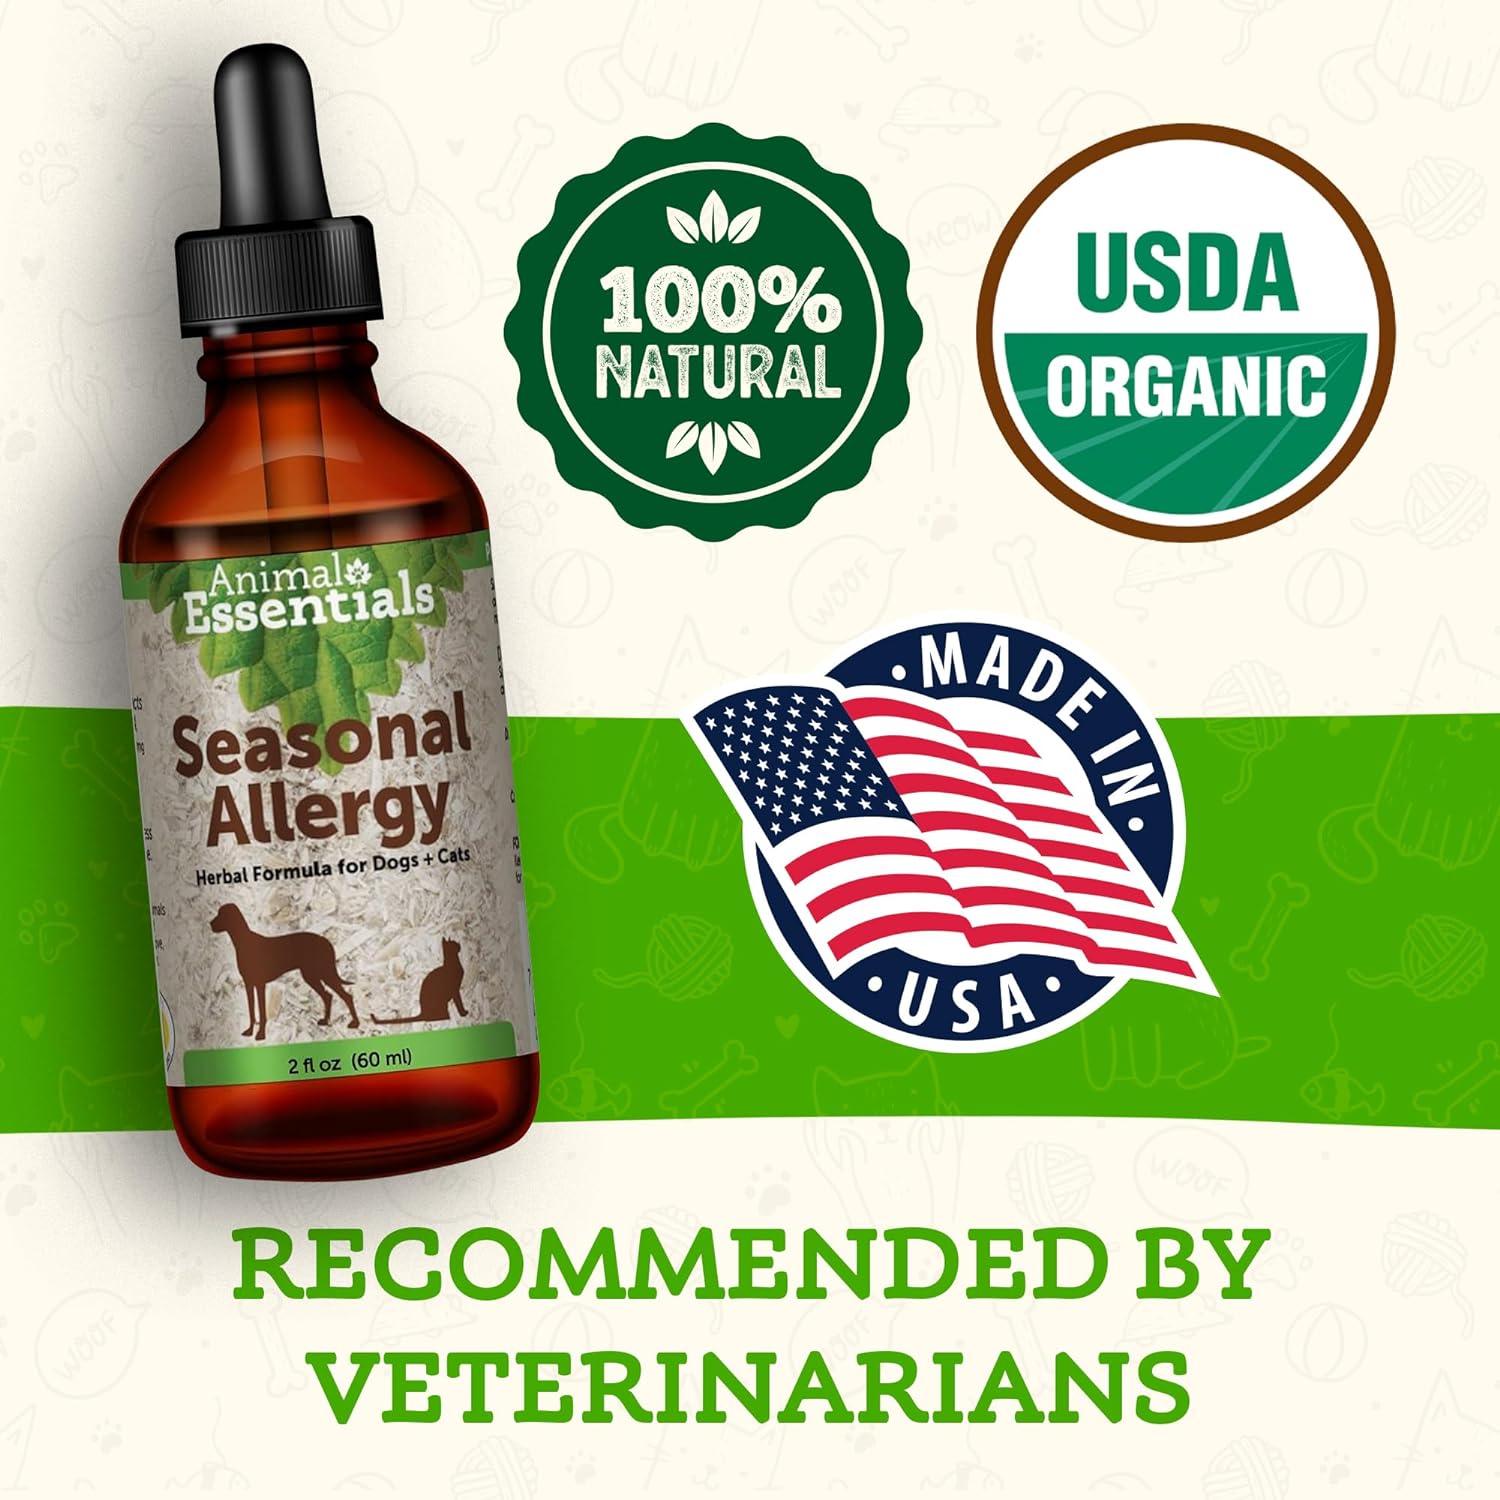 Animal Essentials Seasonal Allergy for Dogs & Cats - Allergy Relief, Licorice Root, Seasonal Support, Liquid Drops, Herbal Formula - 2 Fl Oz : Value : Pet Supplies